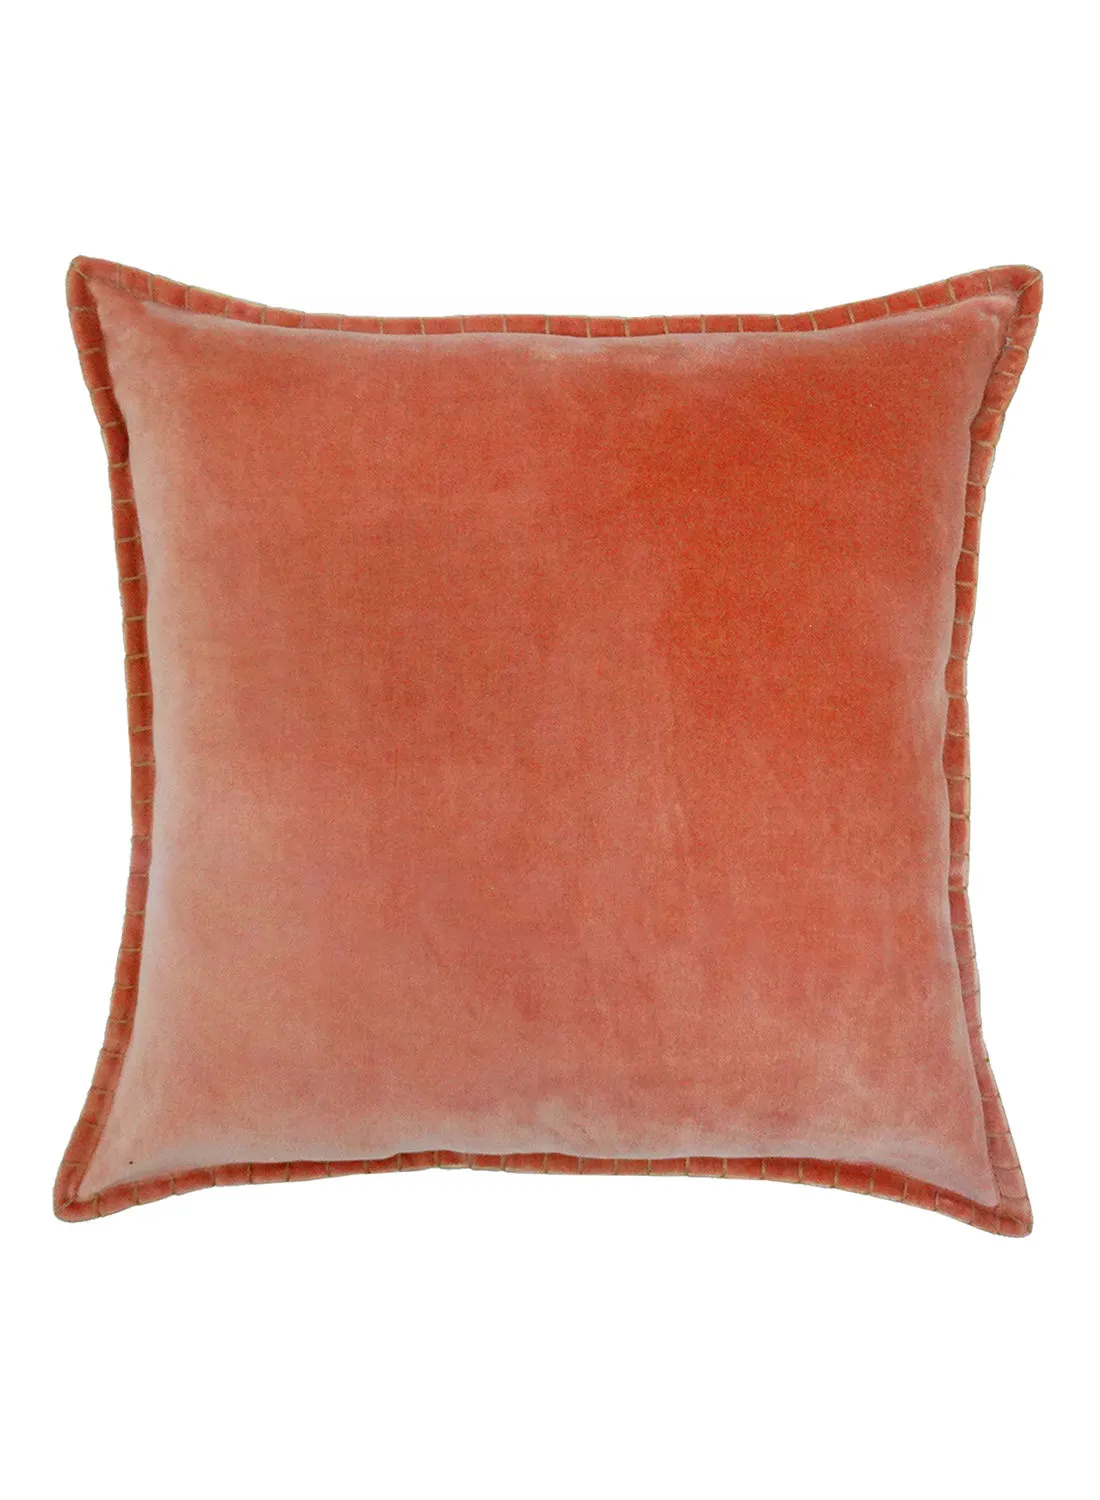 Noon East Decorative Cushion - 100% Cotton Cover Microfiber Infill - Velvet Blanket Stitch Bedroom Or Living Room Decoration Coral 45 x 45cm